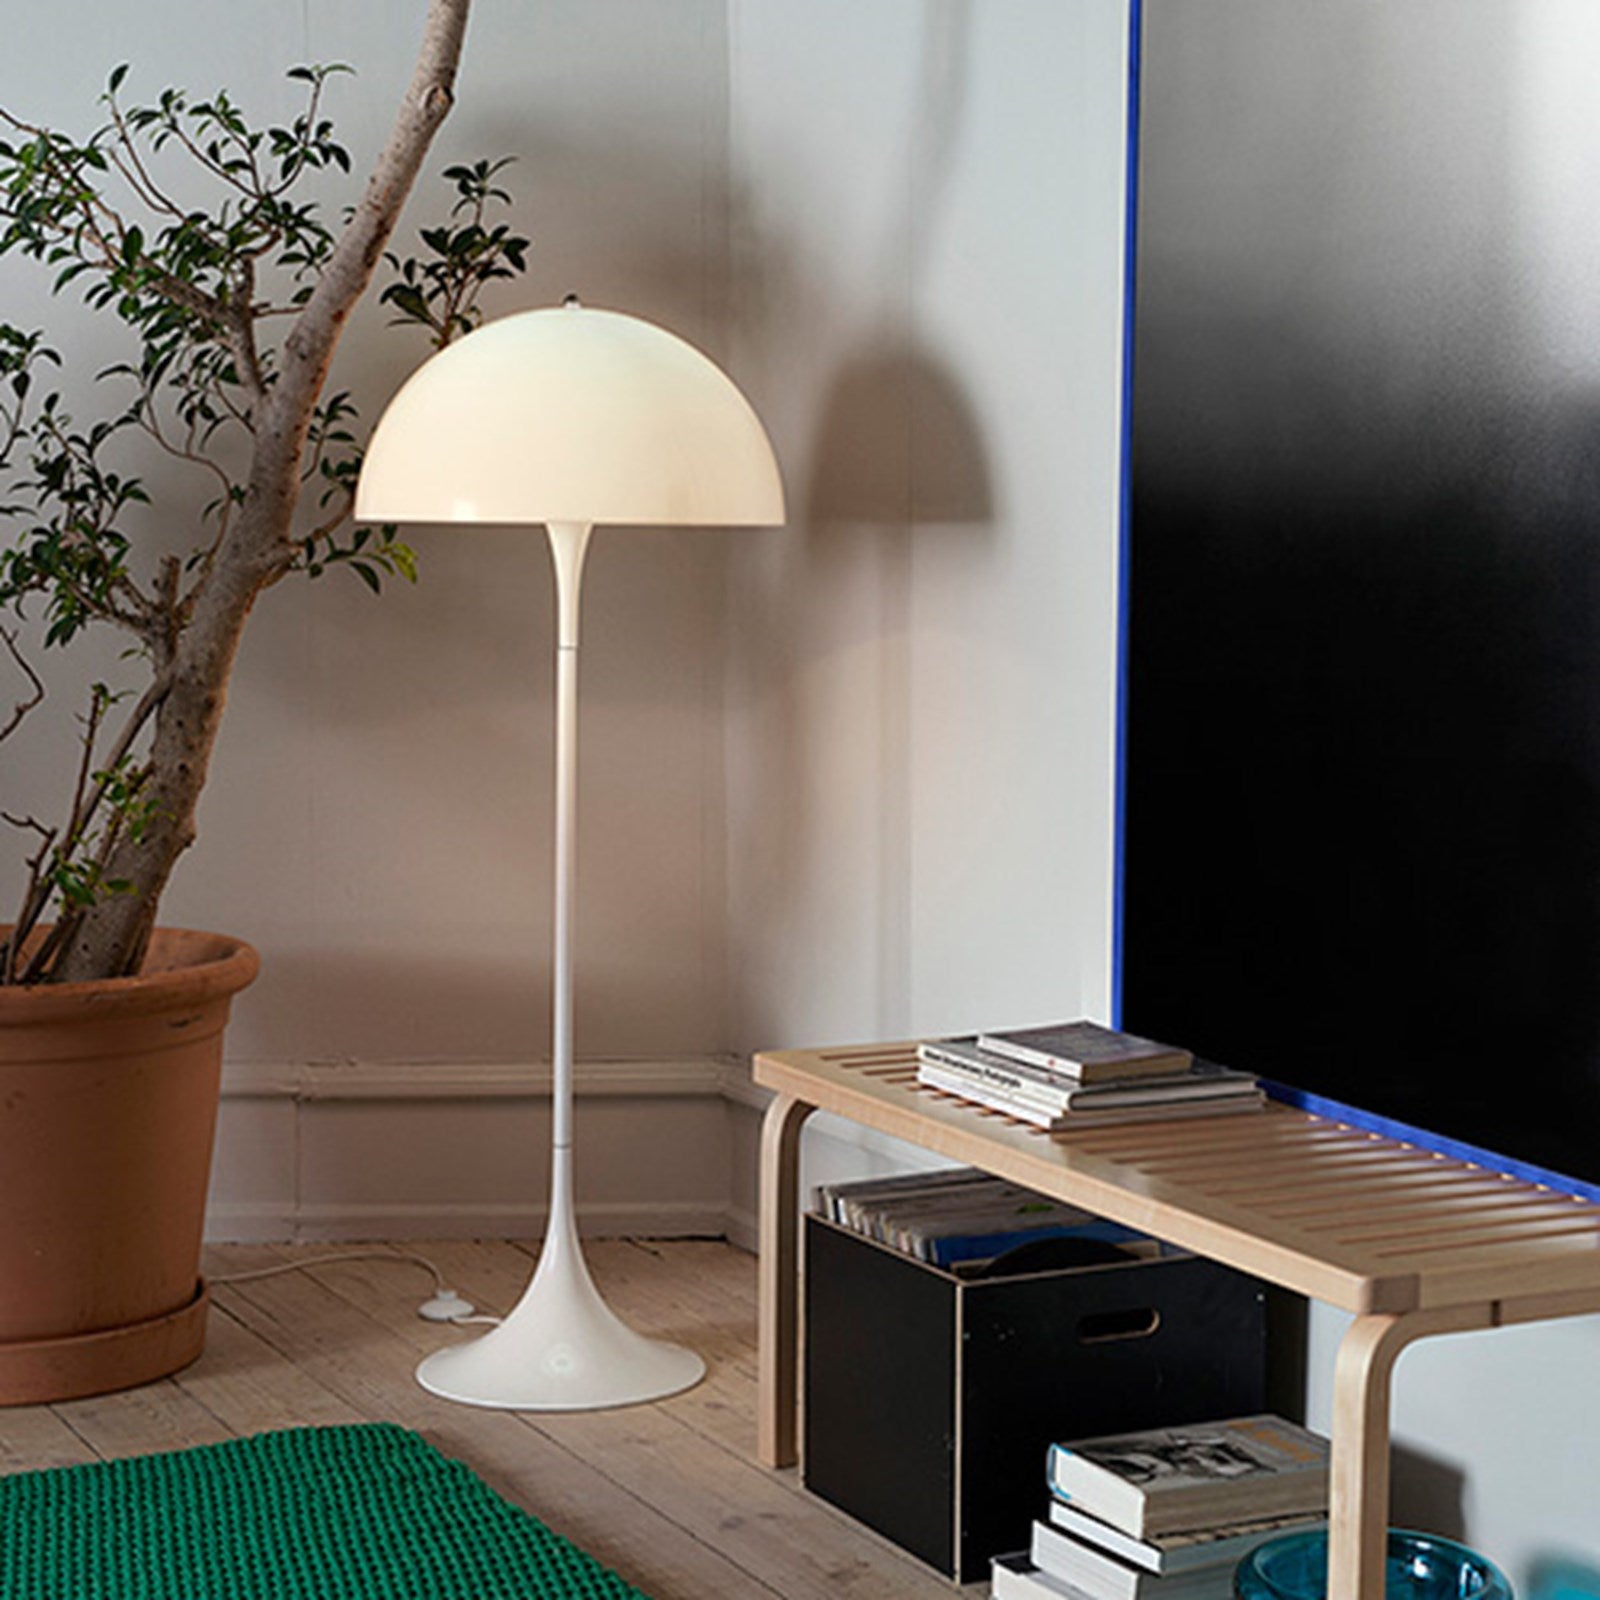 The Pantella Floor Lamp by Louis Poulsen emits a soft and comfortable illumination. The hemispherical shade reflects the light downwards, and the material used ensures that the majority of the light is spread diffusely in the room from the surface of the shade.